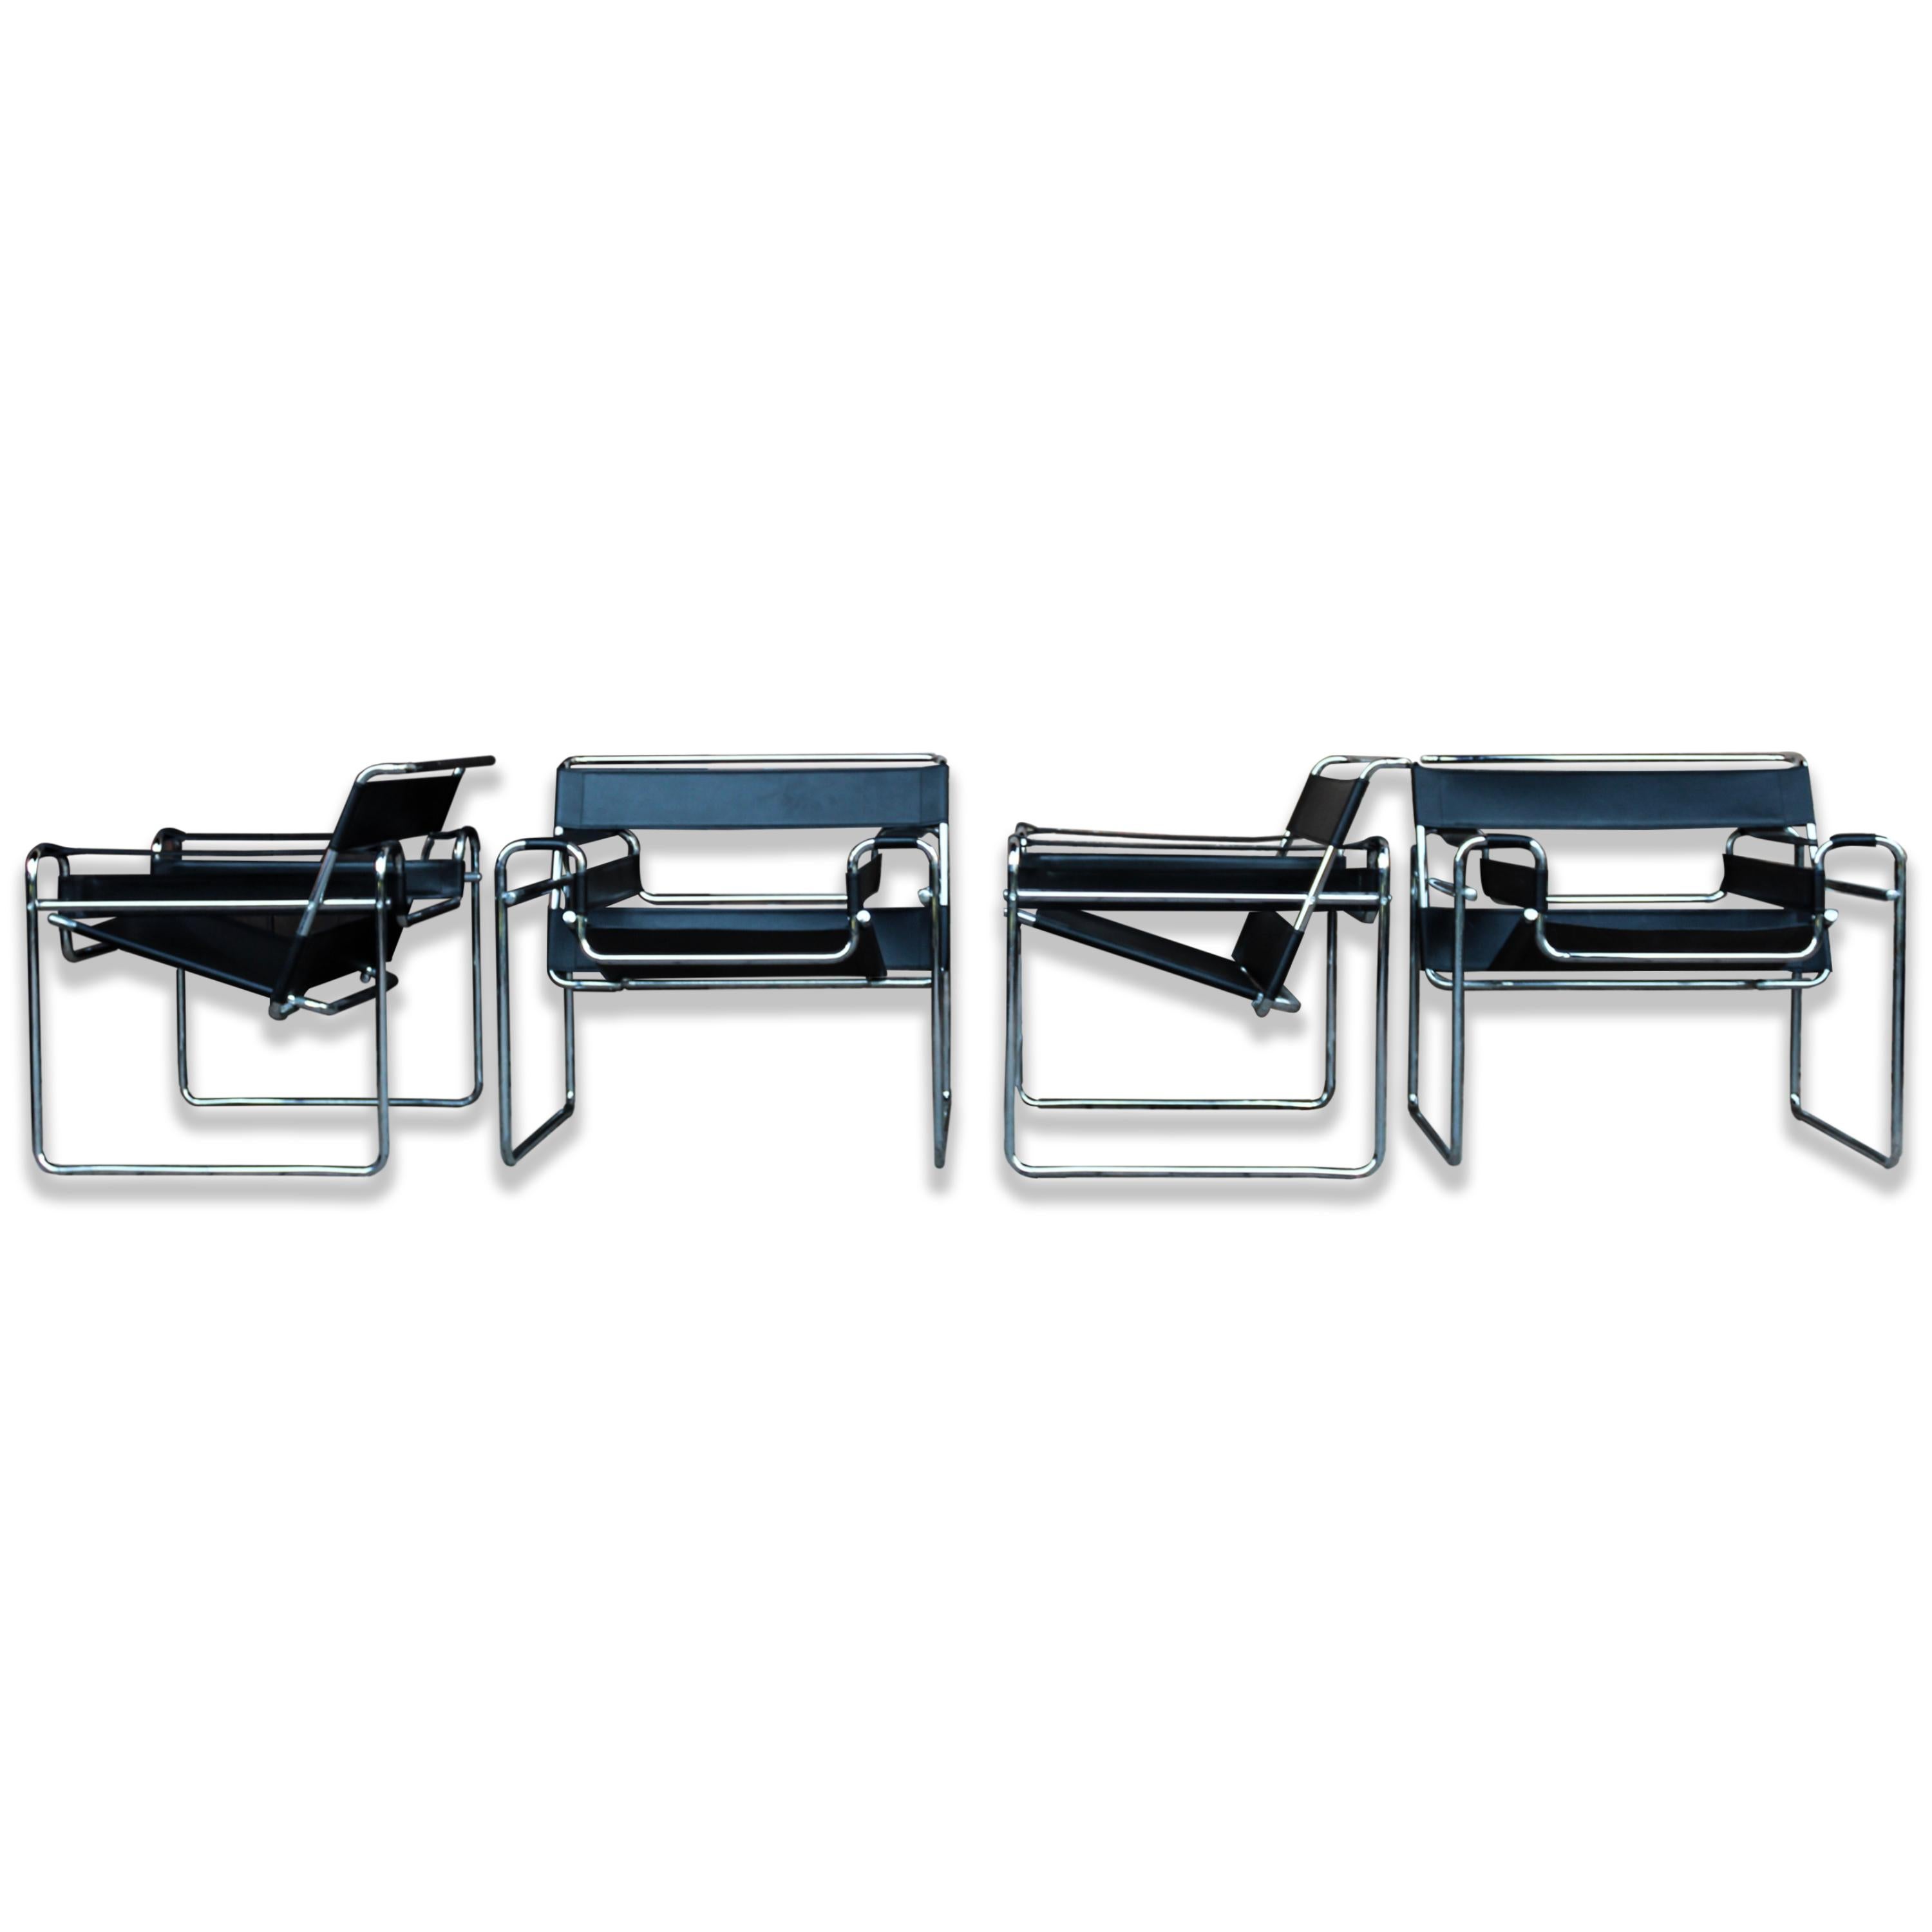 Set of four model B3 “Wassily” armchairs, designed by Marcel Breuer in 1925 and produced by the Italian manufacturer Gavina in 1969.

It features a chrome-plated steel structure and seat and back in black leather.

Excellent vintage condition.

When